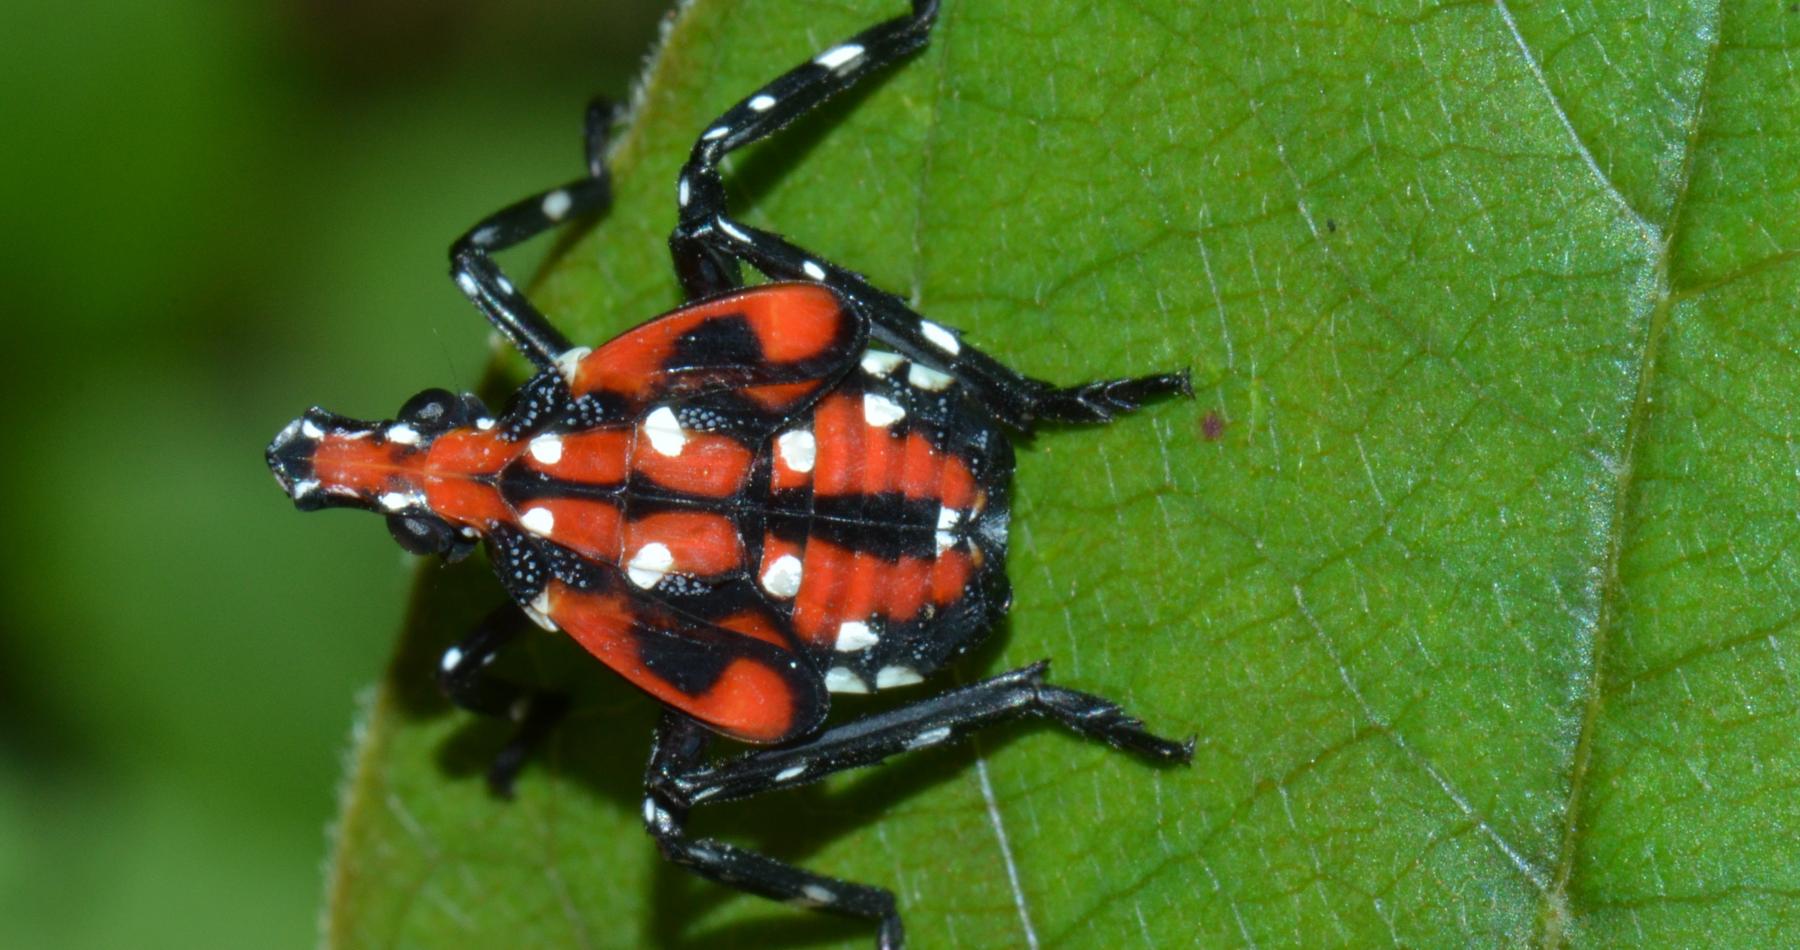 Spotted lanternfly 4th instar nymph. Image courtesy of Gregory Hoover. 